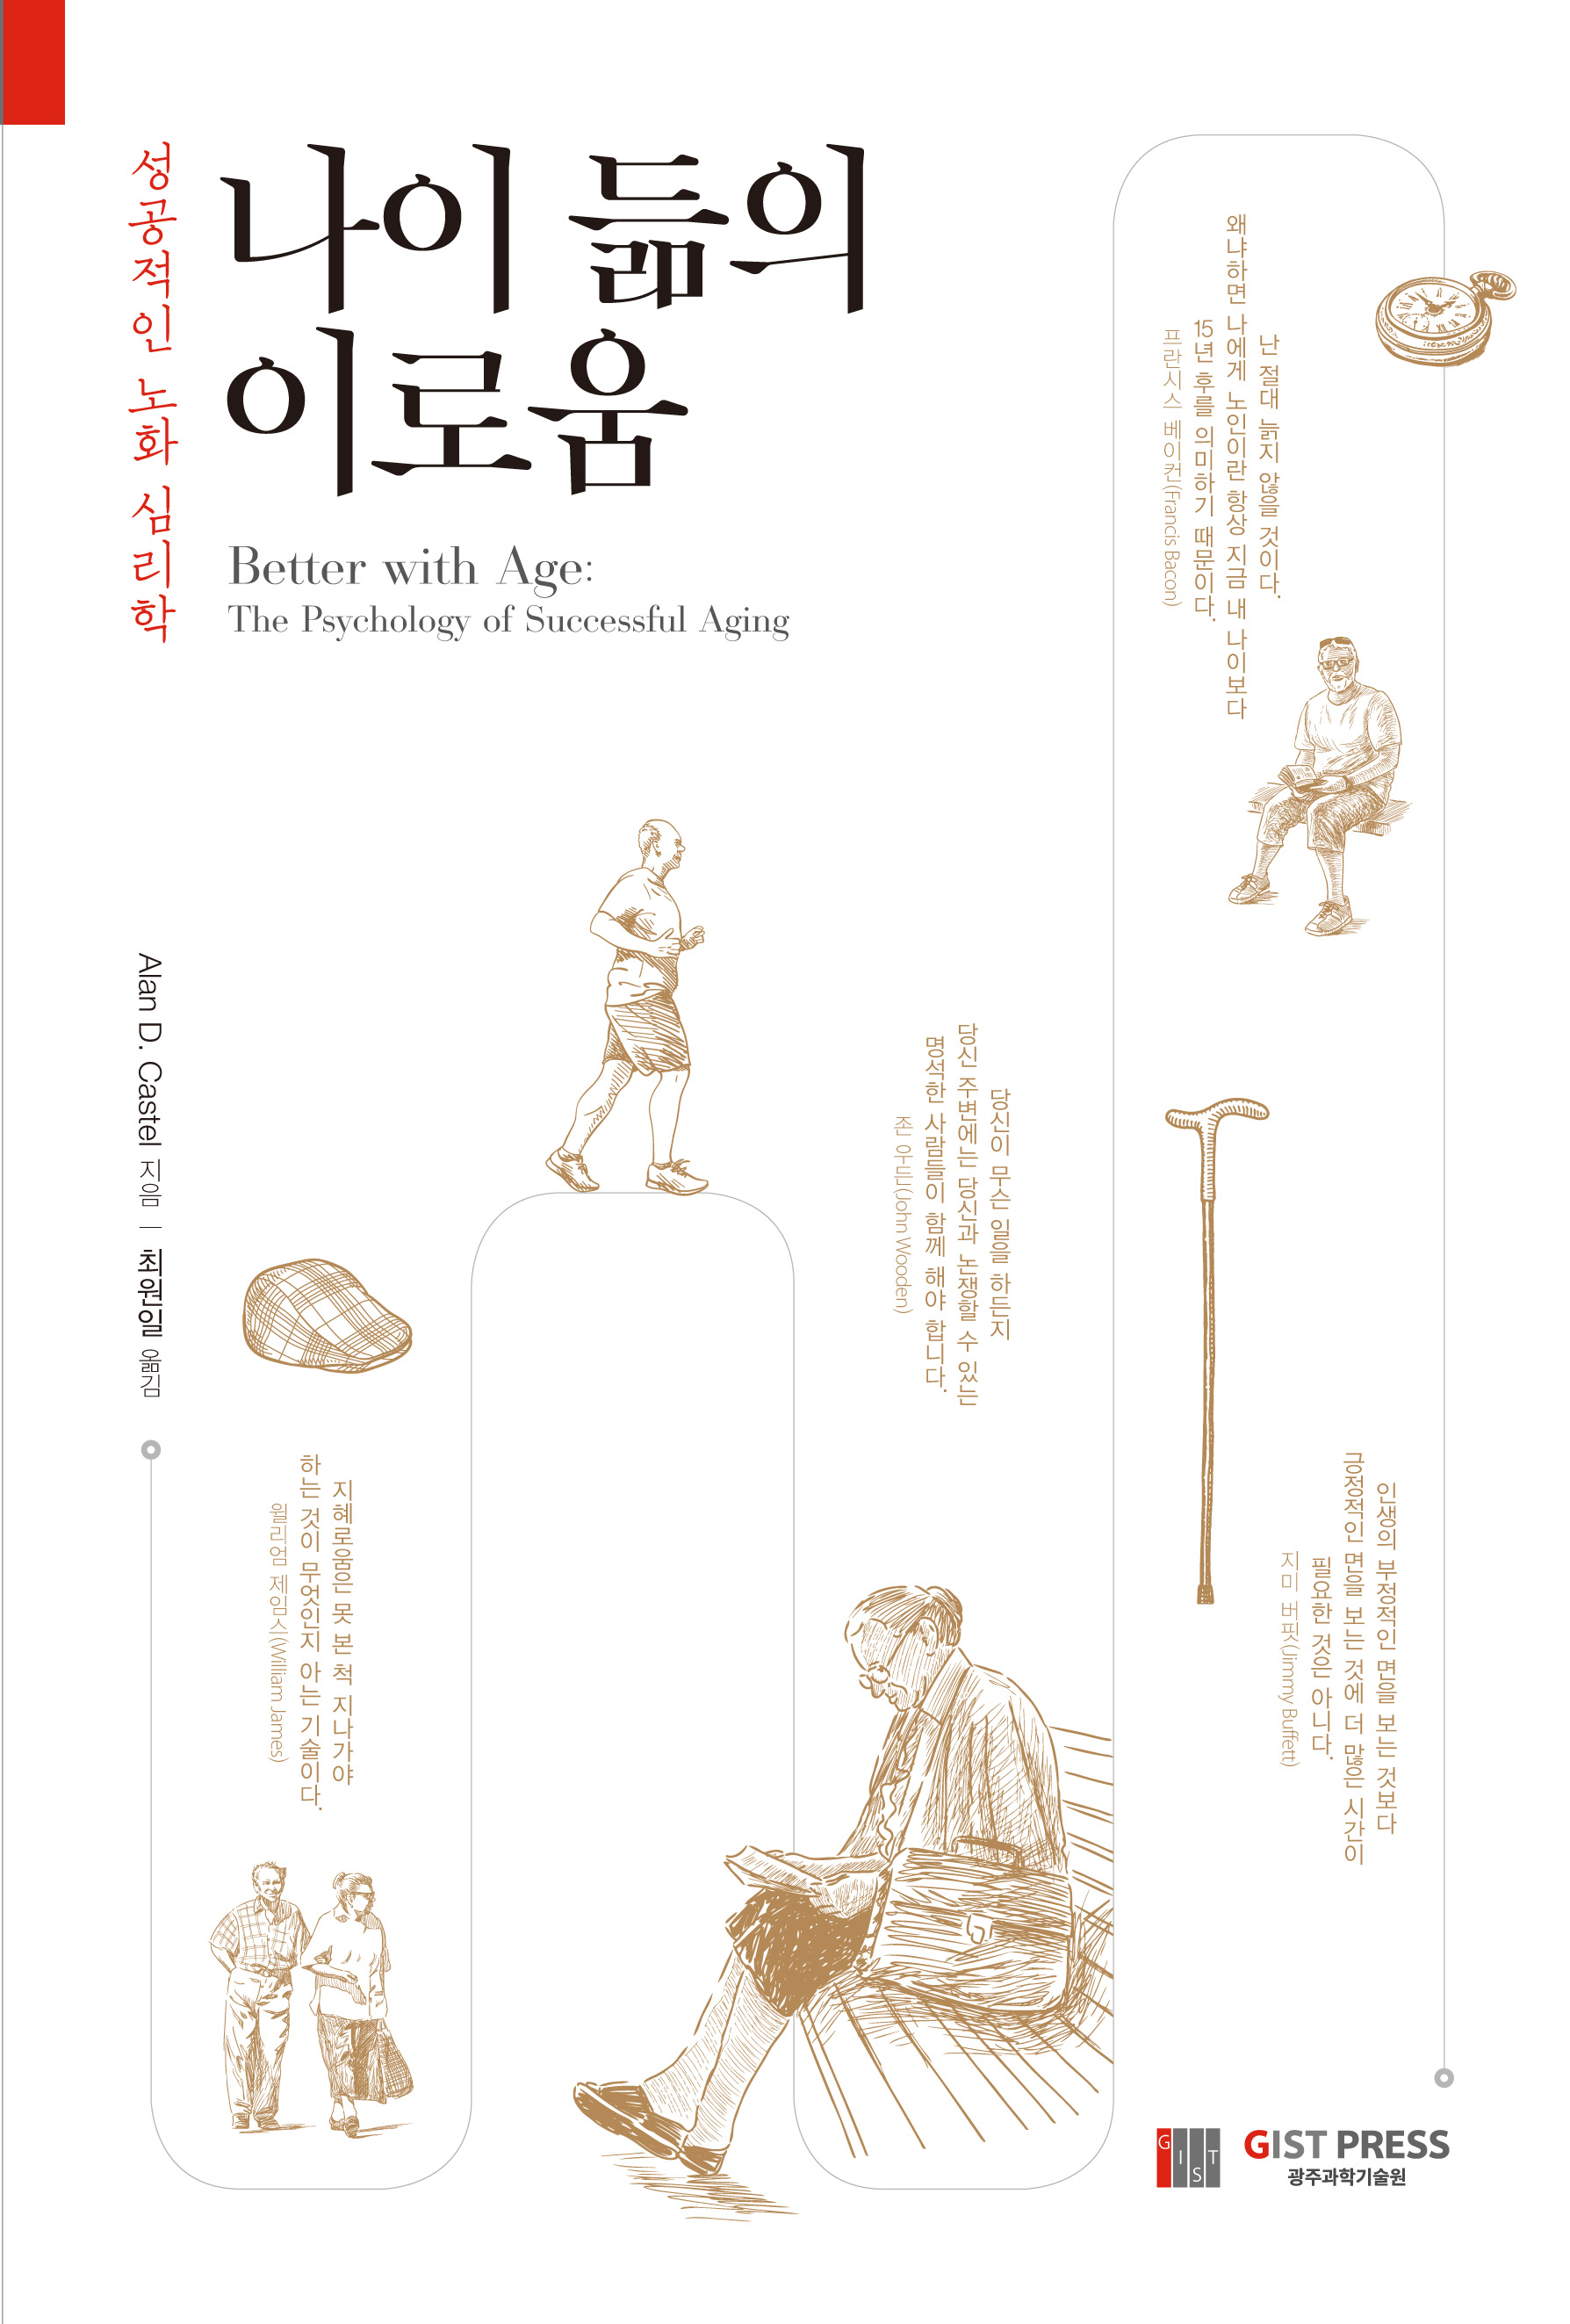 GIST publishes a translation of 'Benefits of Aging' for successful aging 이미지